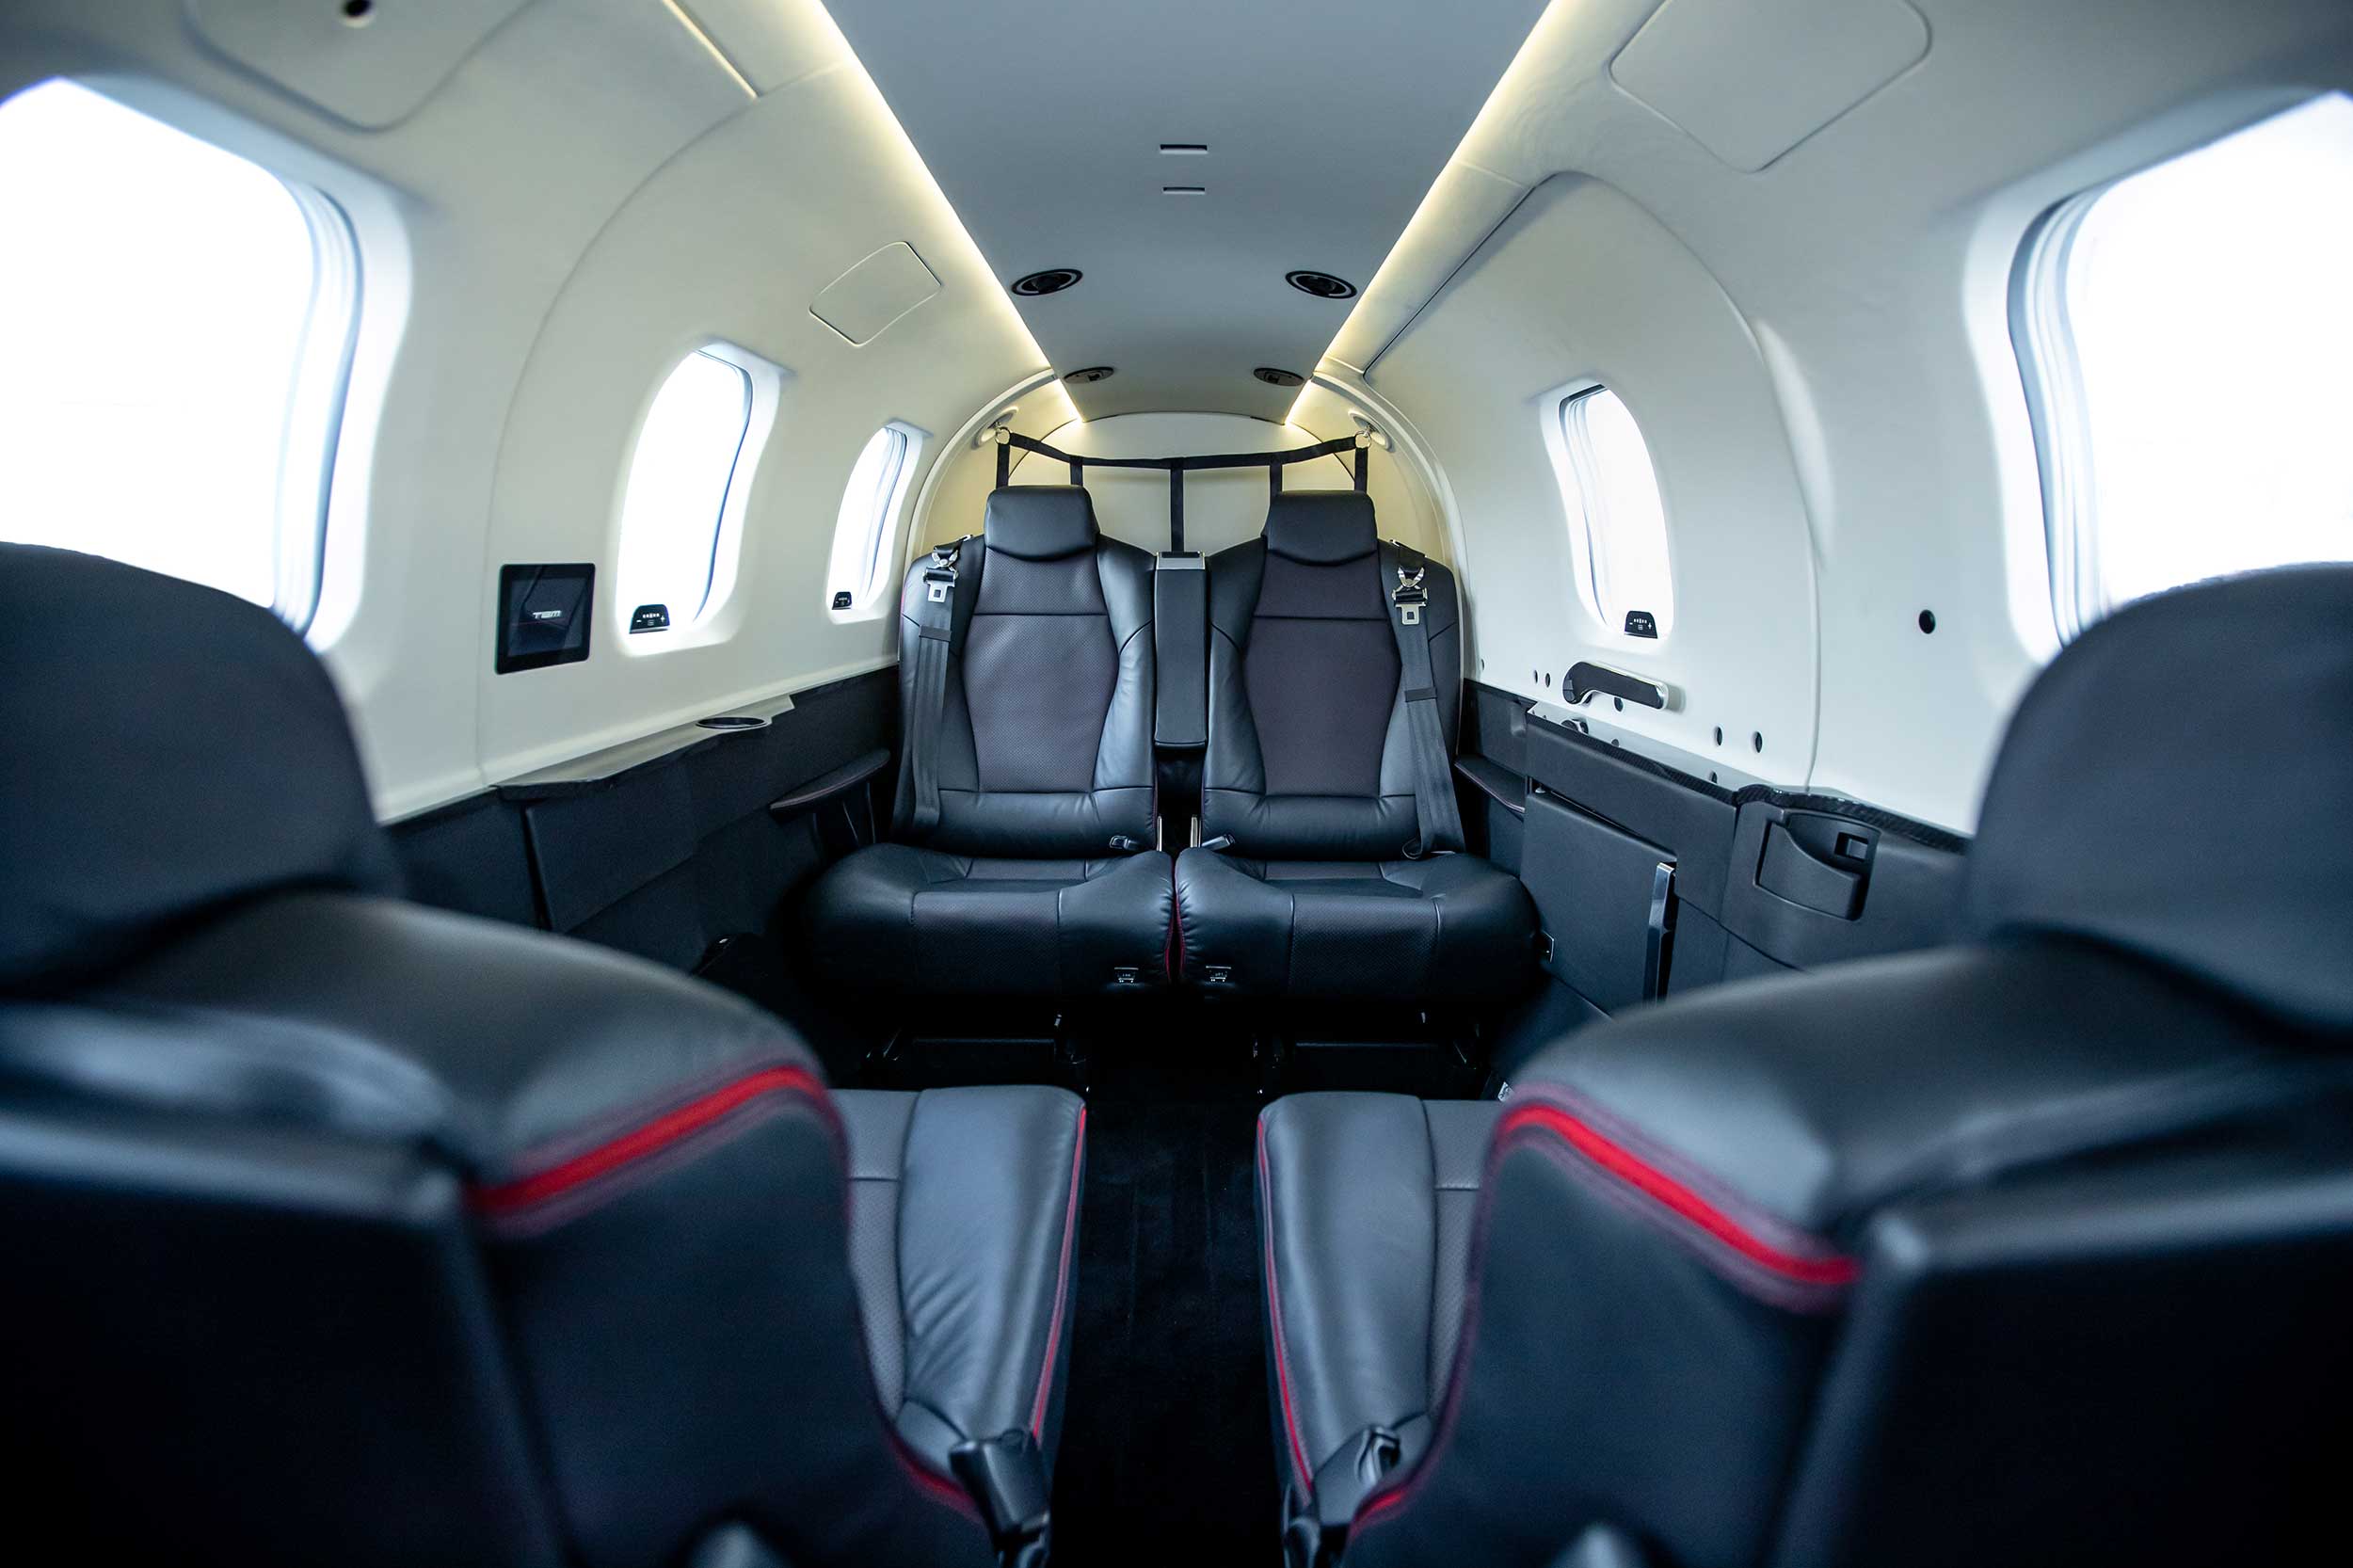 Meanwhile, in the TBM 960's cabin, it's sheer luxury! 